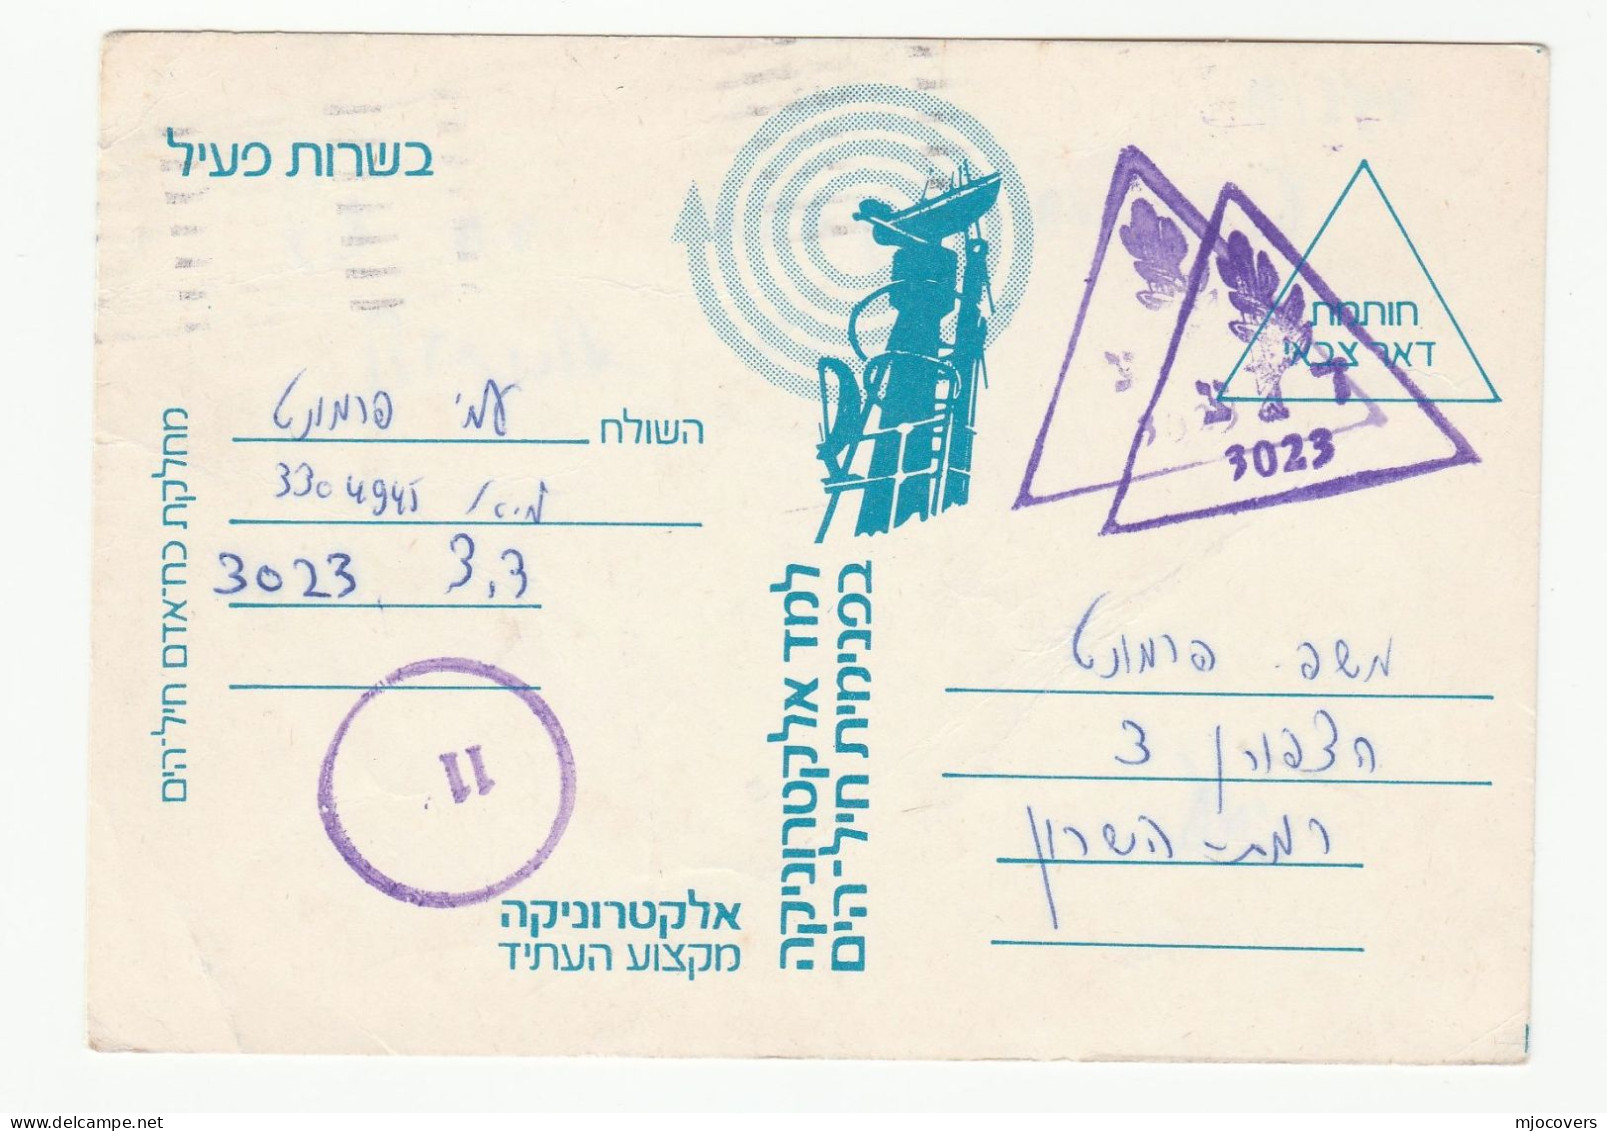 1979 Israel NAVY MILITARY SERVICE CARD  Forces Mail SHIP Cover Zahal Postcard Unit 3023 Naval Electronics School - Cartas & Documentos